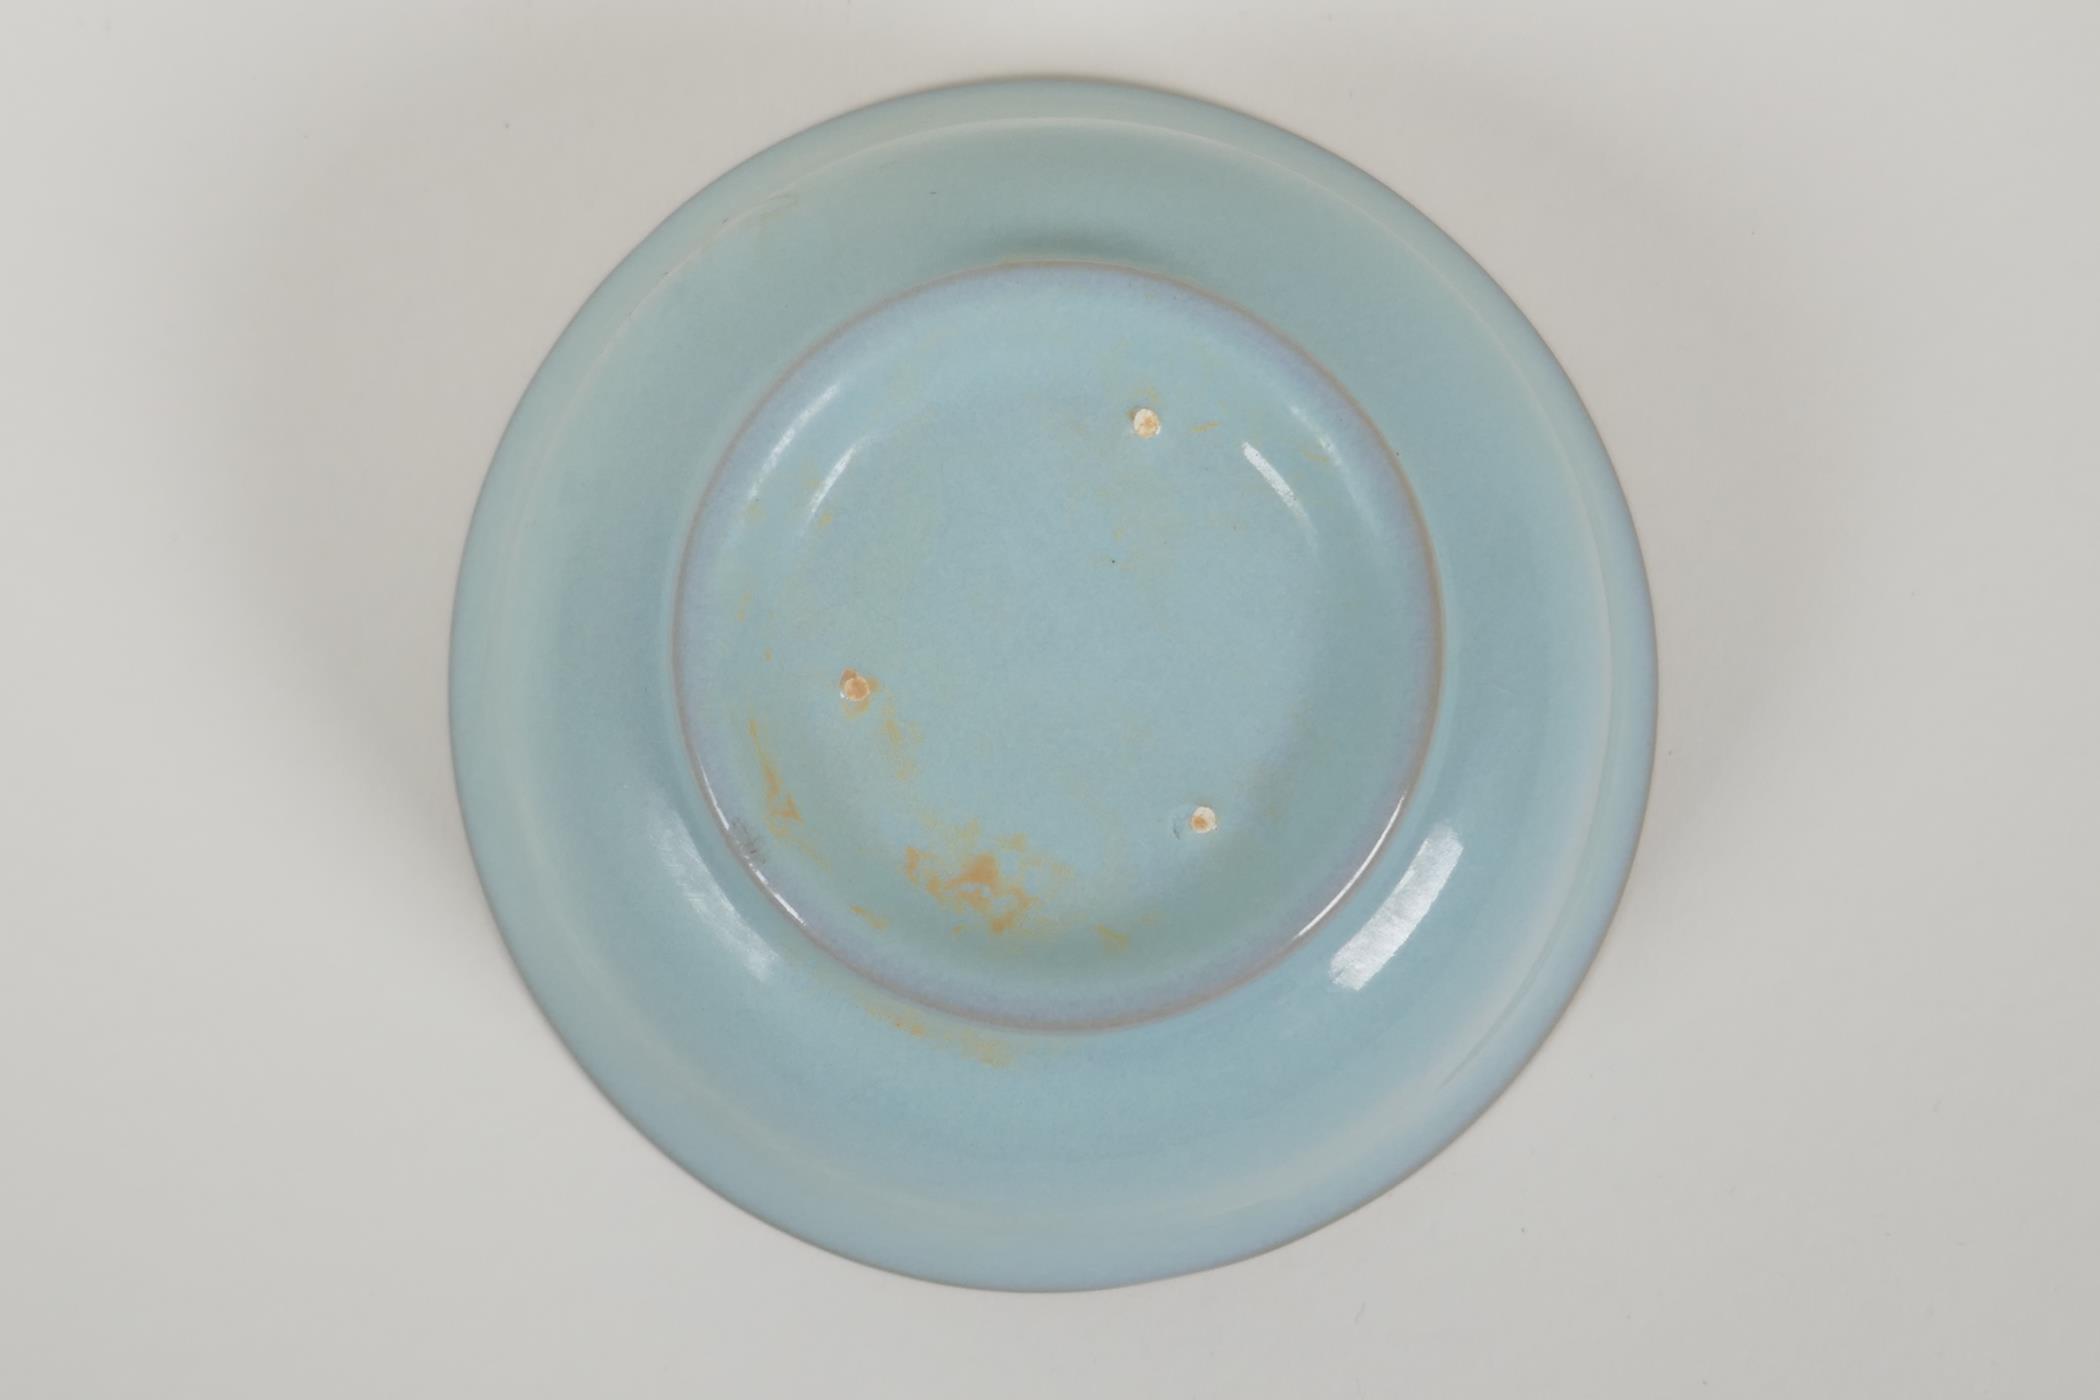 A Chinese celadon Ru ware style porcelain rice bowl, 5½" diameter - Image 6 of 6